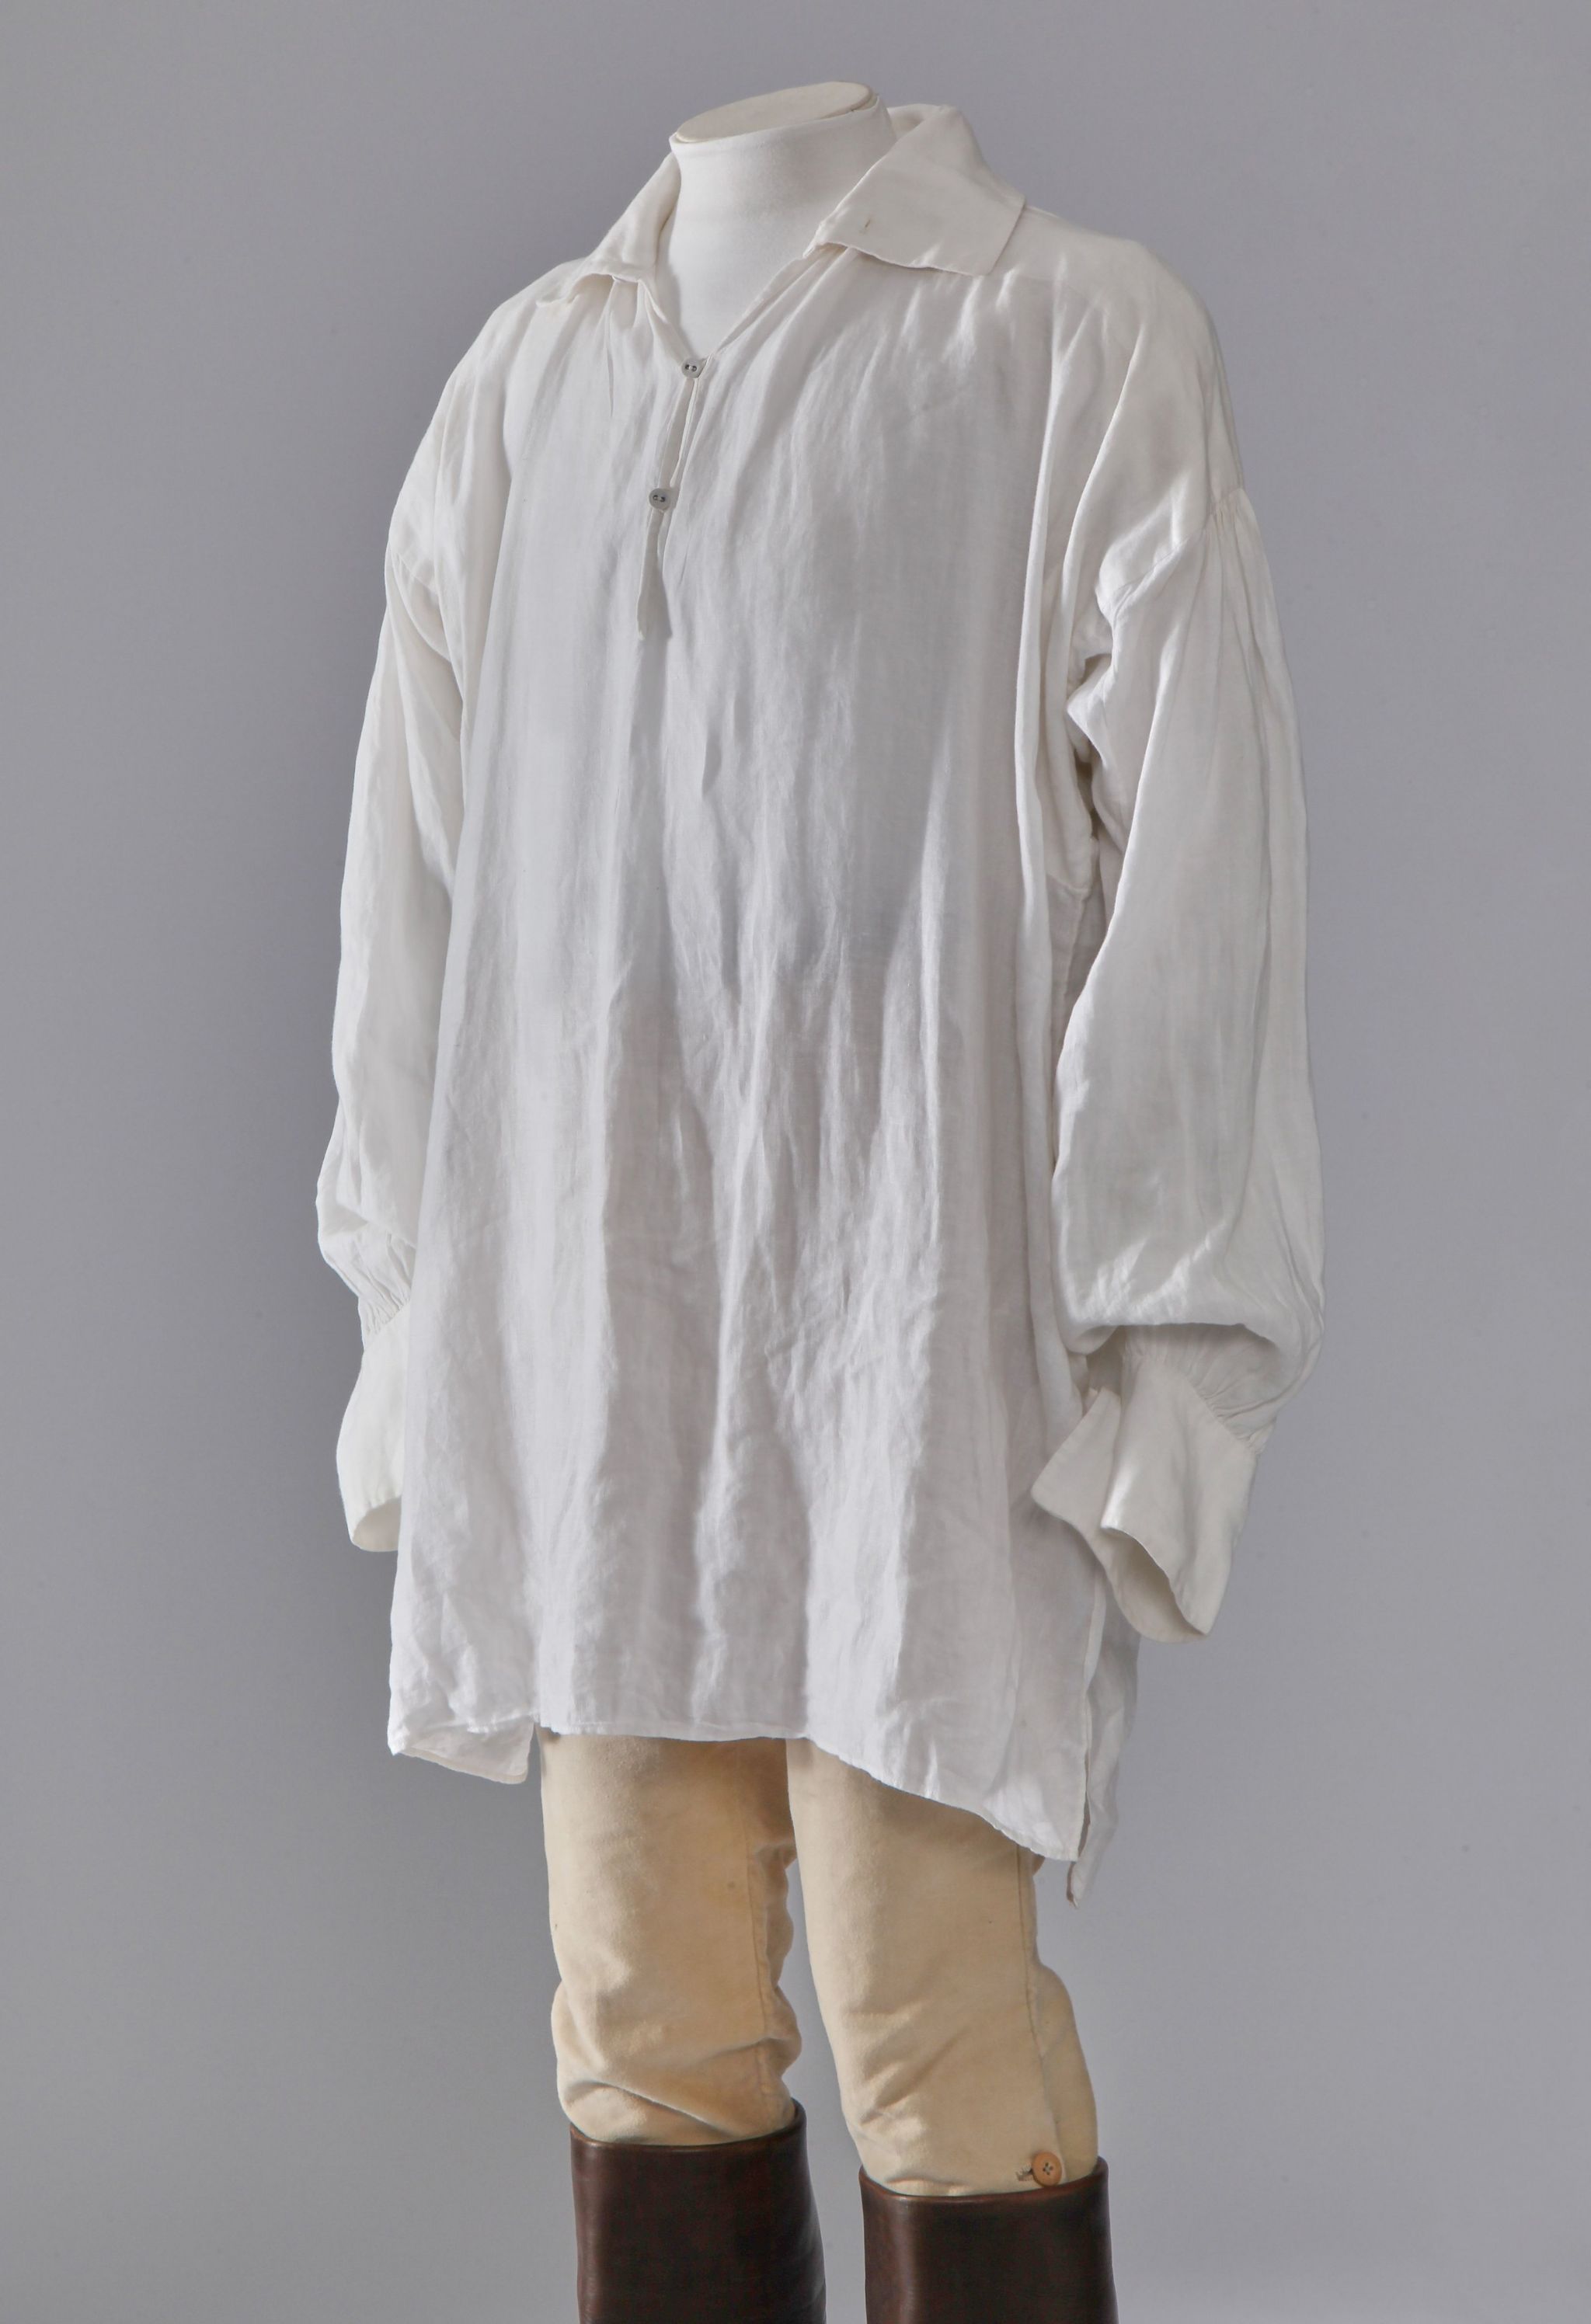 The shirt worn by Colin Firth in Pride and Prejudice